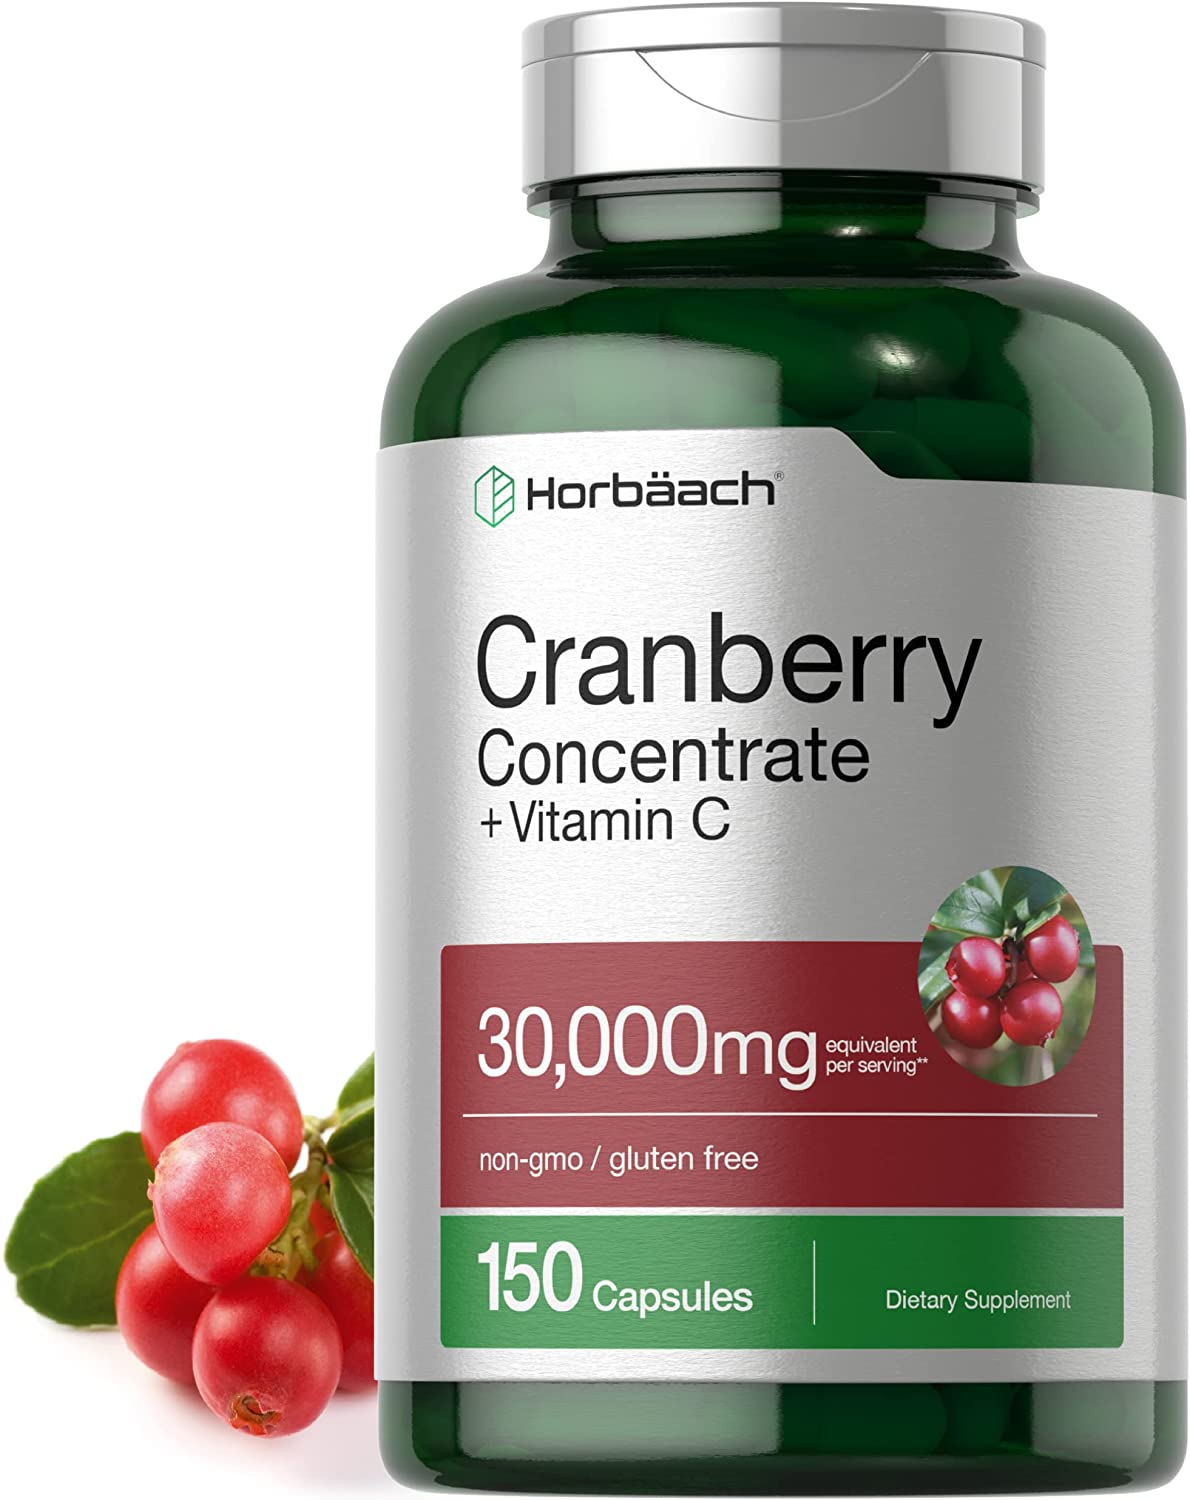 Horbaach Cranberry Concentrate Vitamin C - 150 Tablet